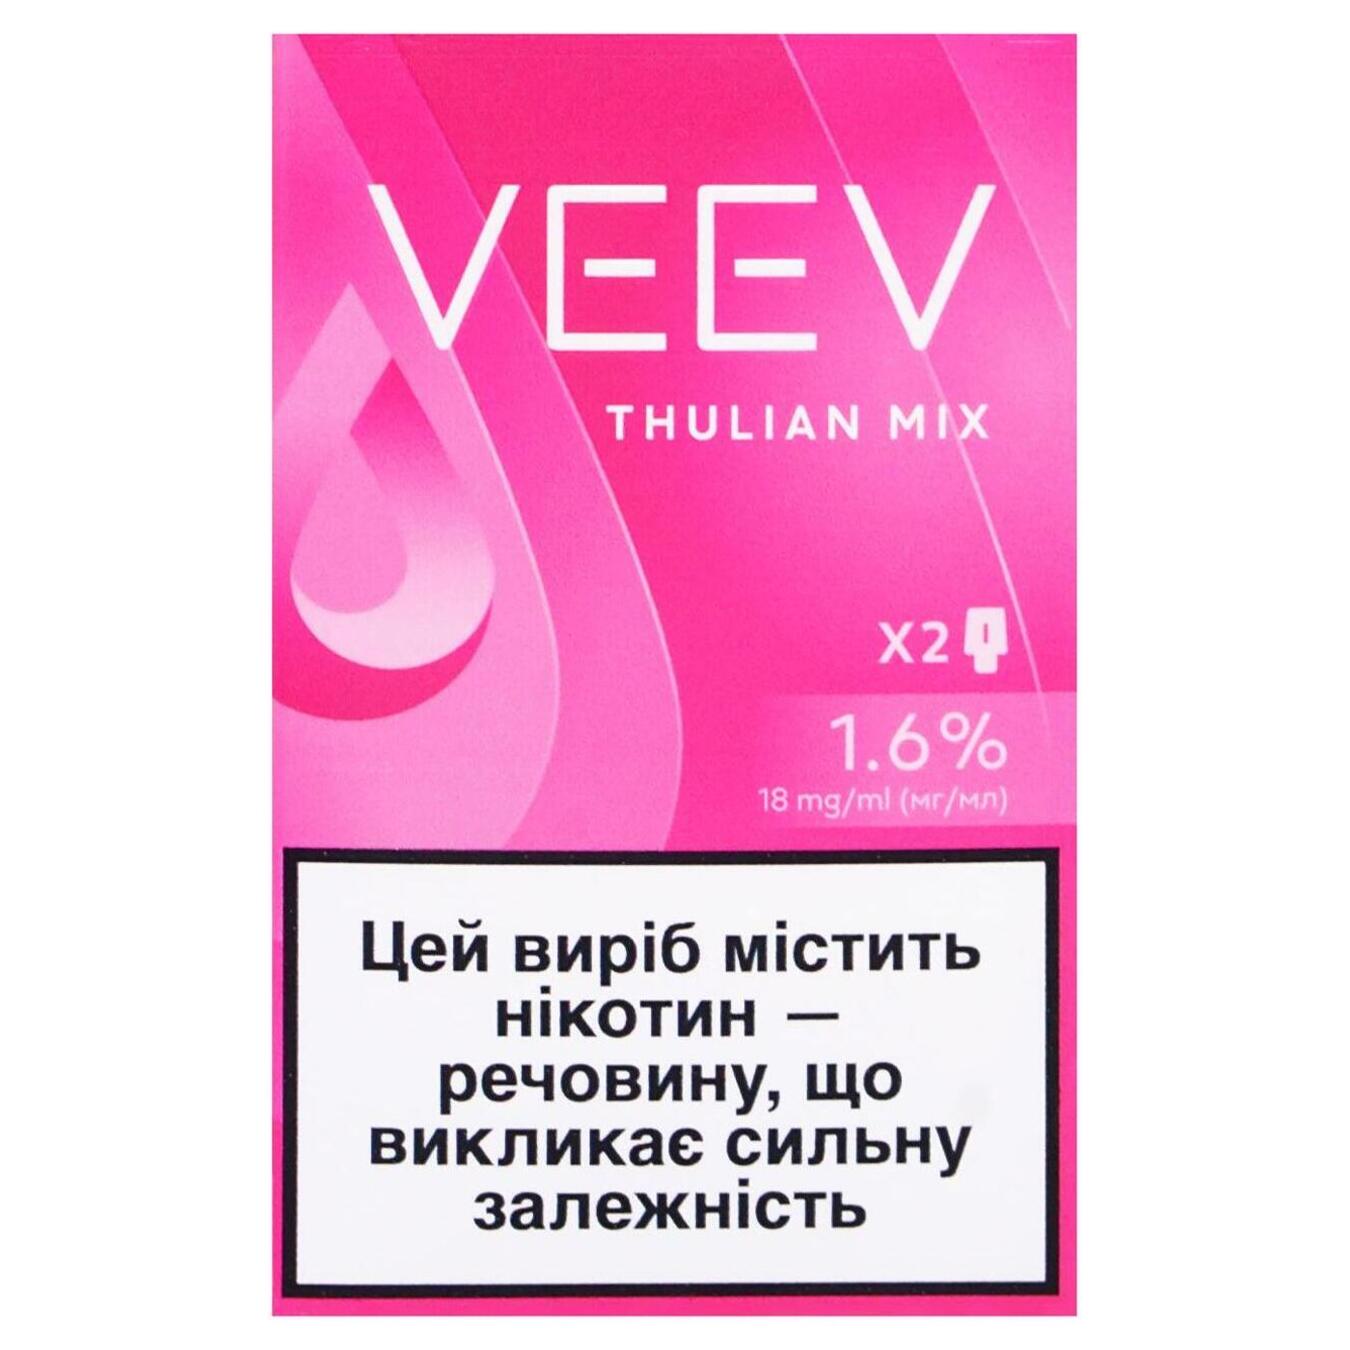 Cartridge VEEV Thulian Mix 1.6% (the price is indicated without excise duty)